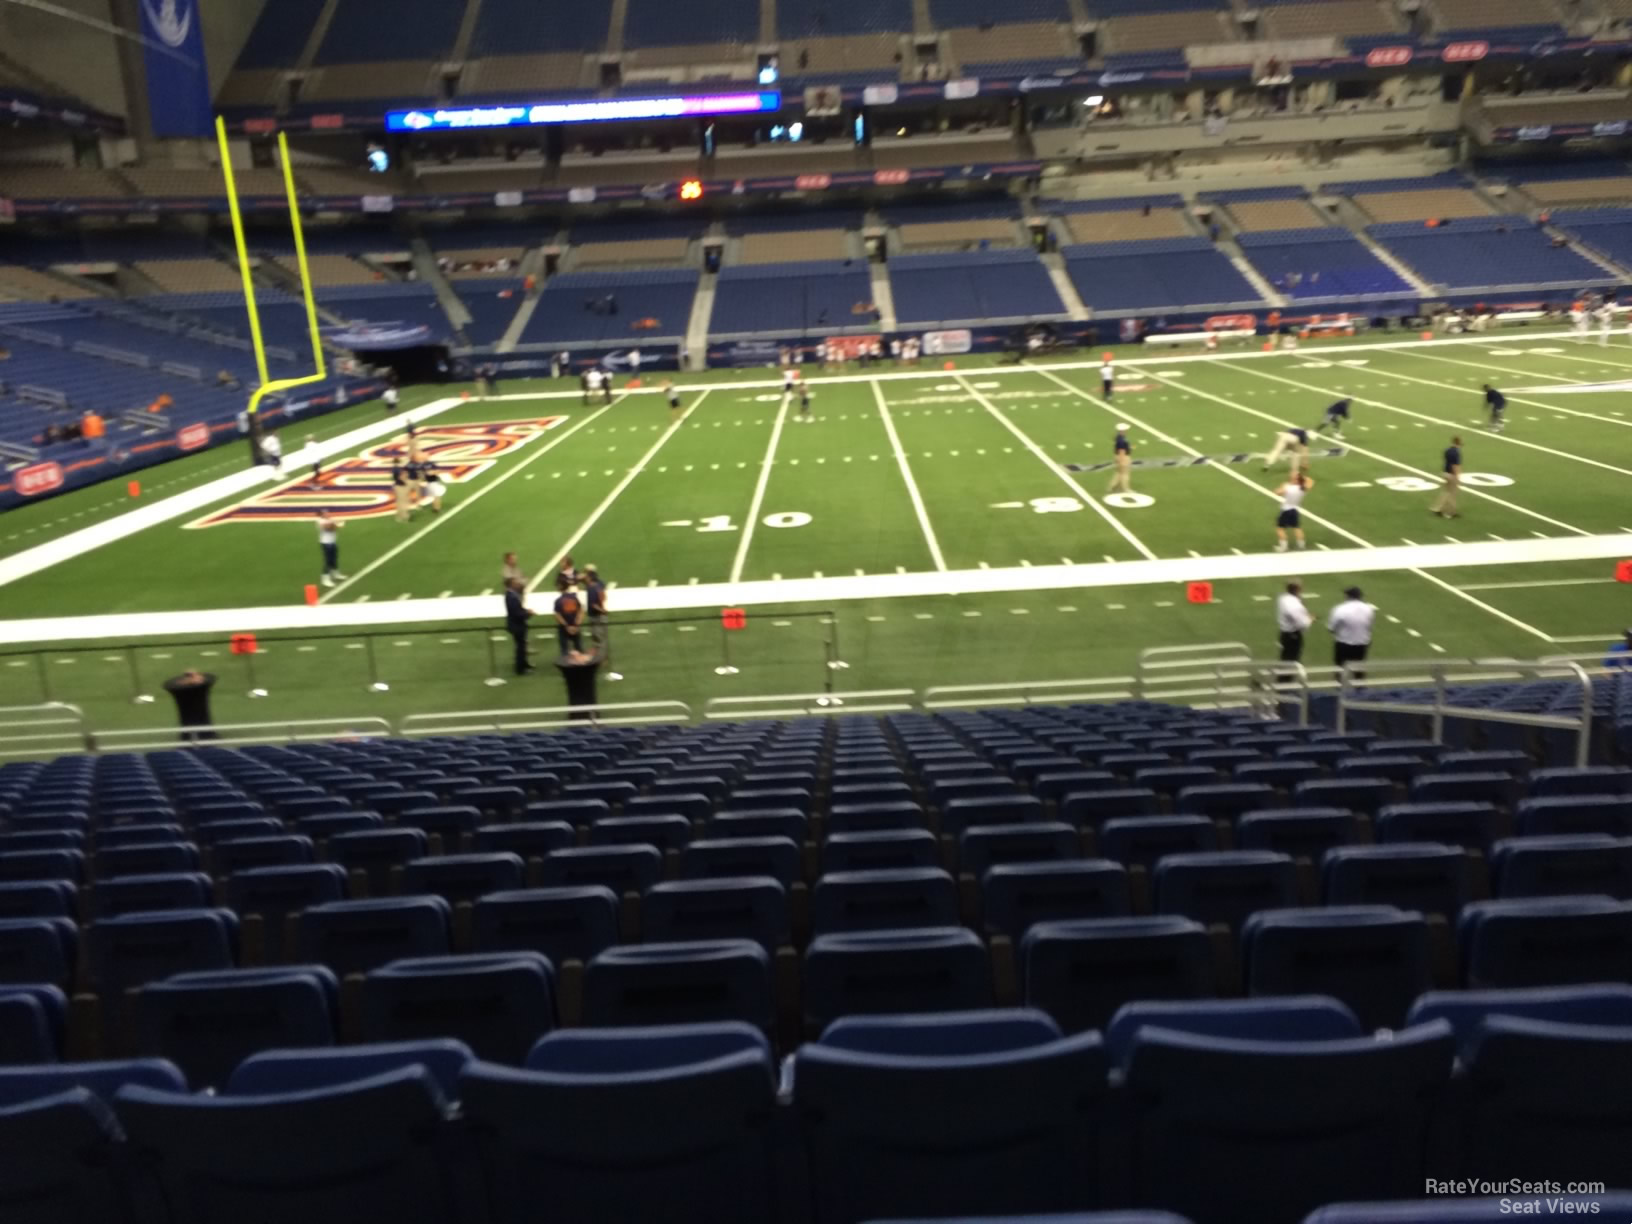 section 137, row 18 seat view  for football - alamodome